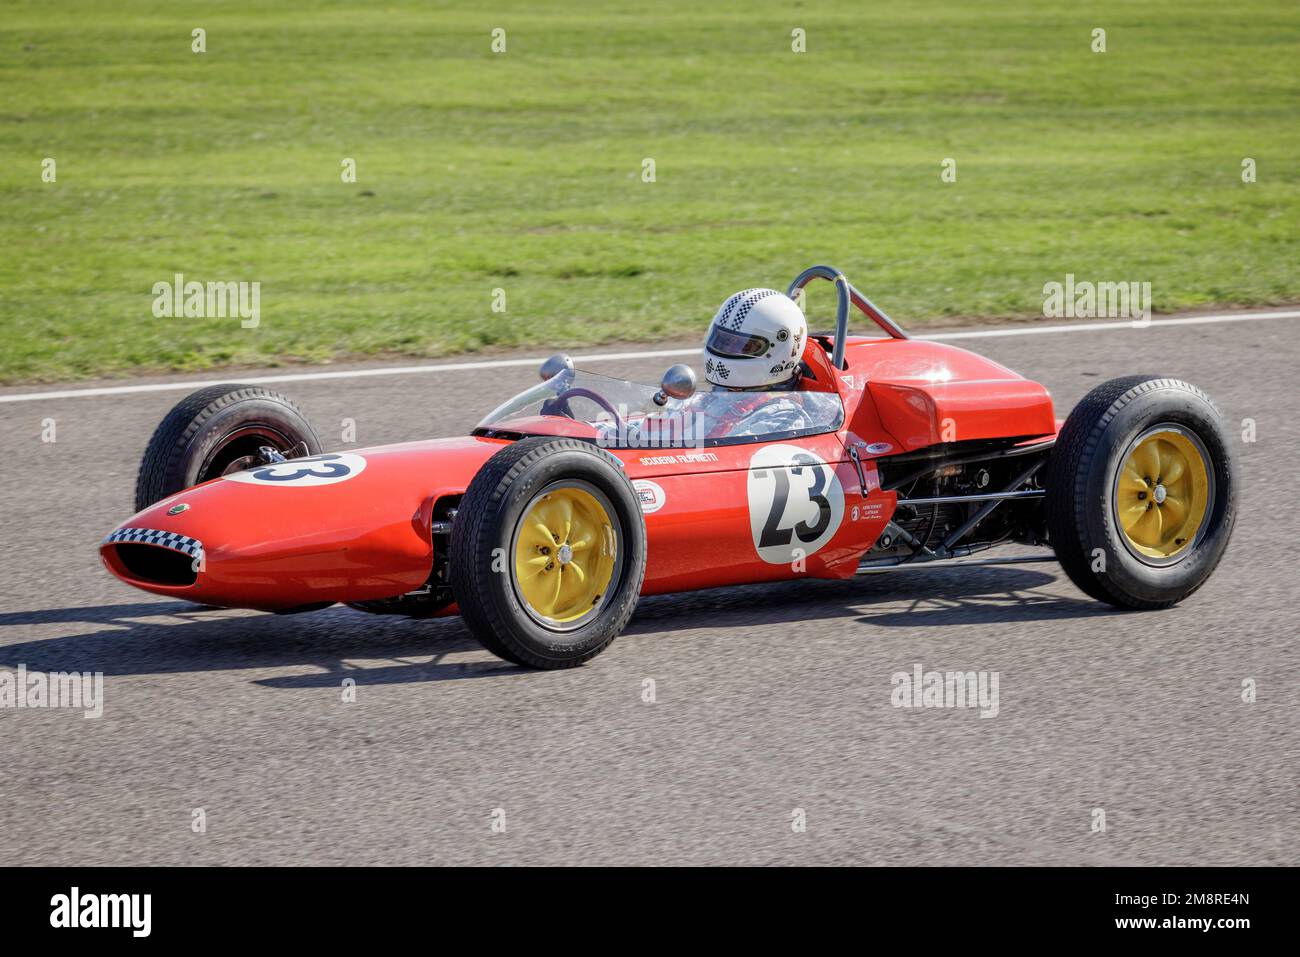 Franck Trouillard in the 1962 Lotus-Climax 21/24 during the Glover Trophy race at the 2022 Goodwood Revival, Sussex, UK. Stock Photo